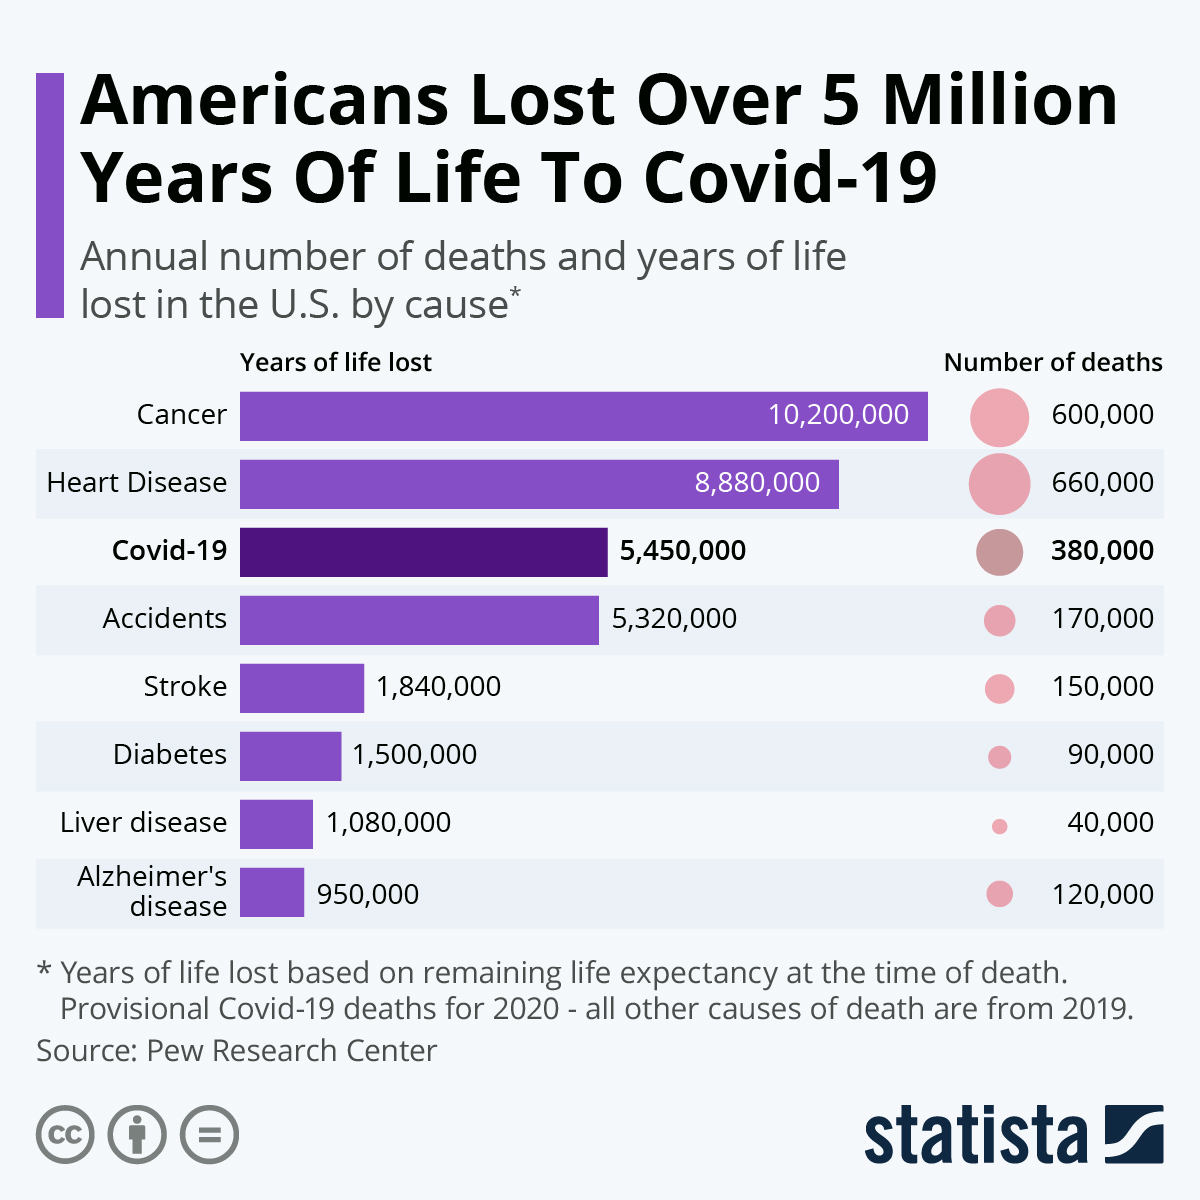 Americans Lost Over 5 Million Years Of Life To Covid-19